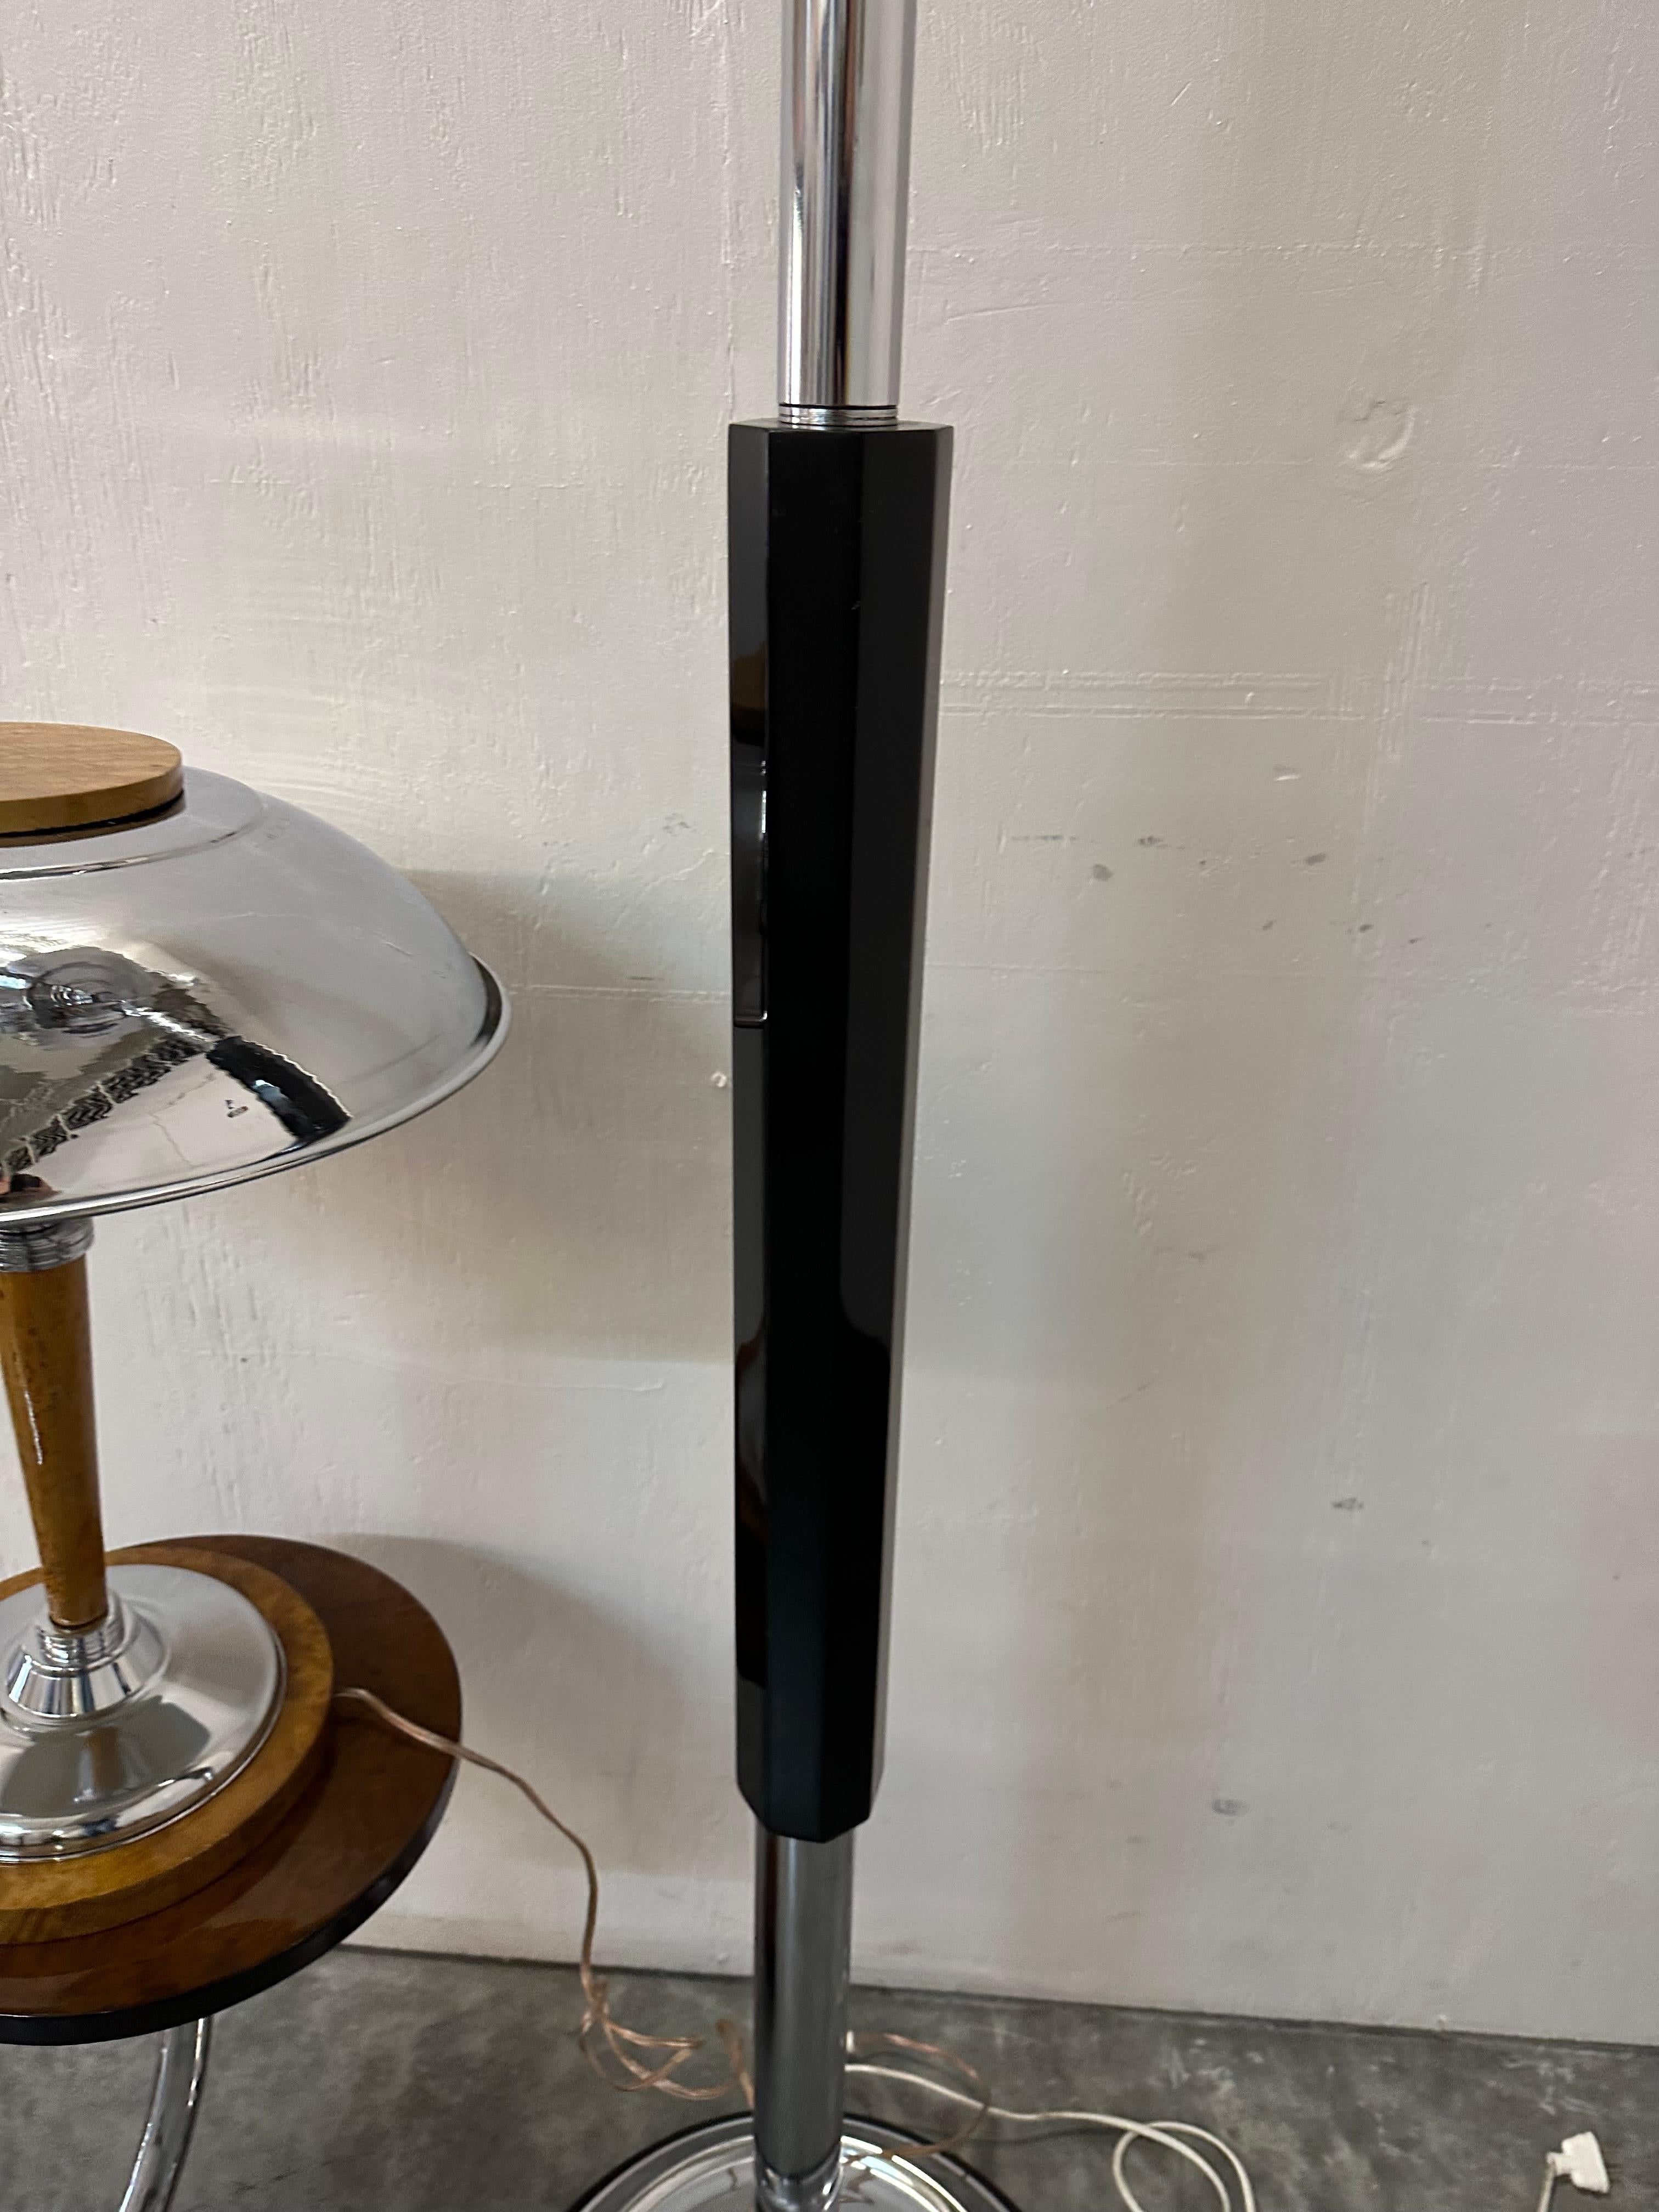 2 Art Deco Floor Lamps, France, Materials: Wood, glass and Chrome, 1940 For Sale 2